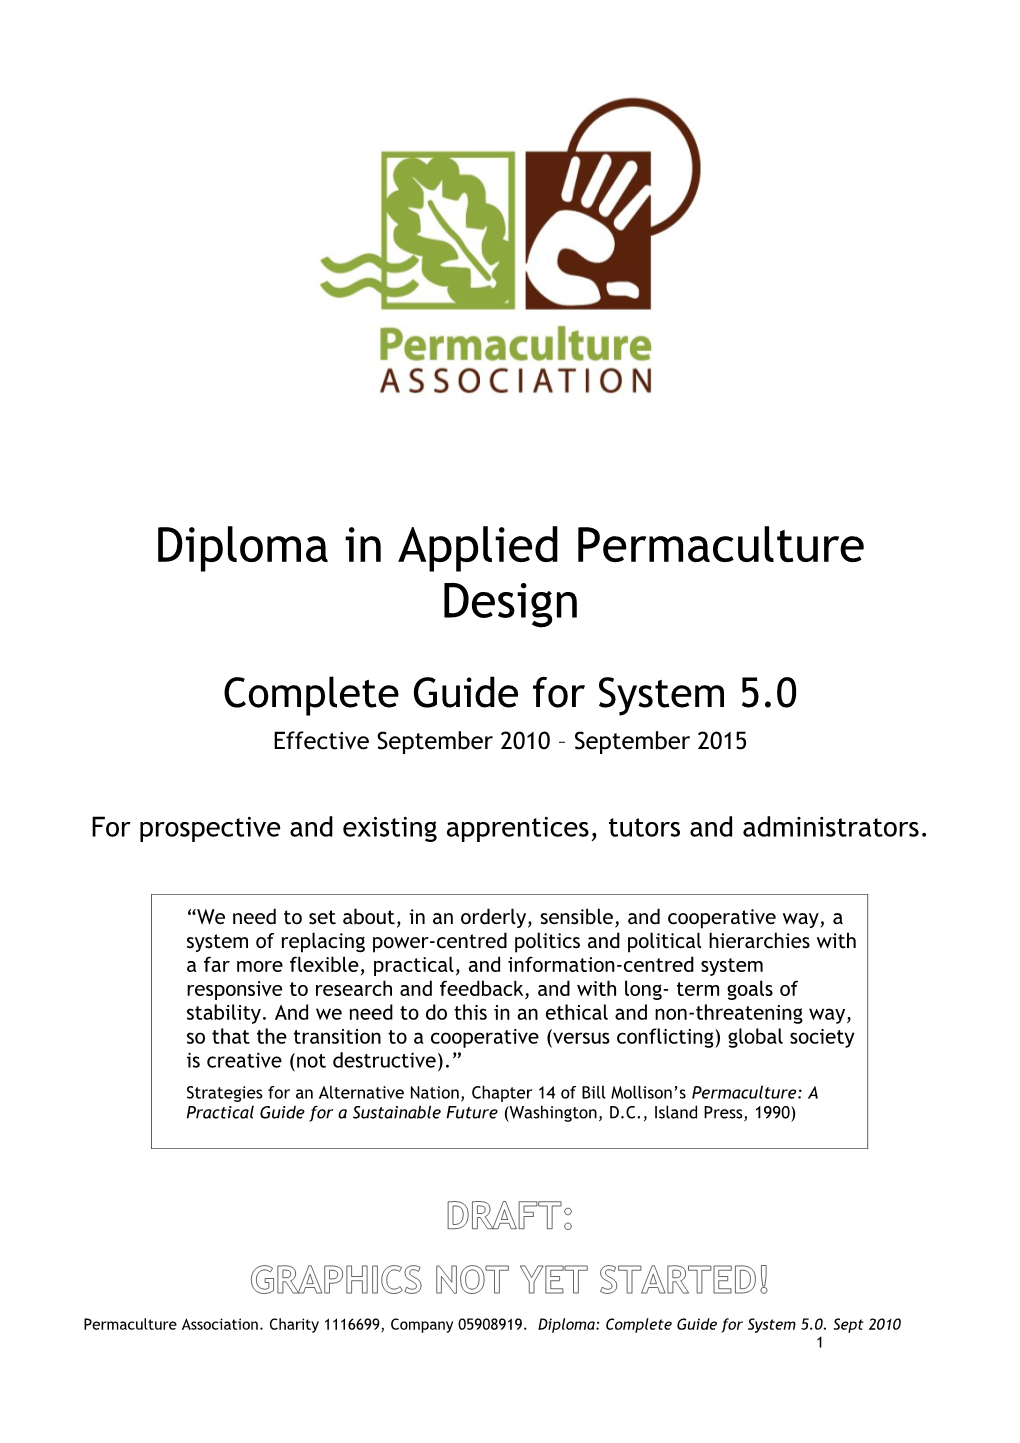 Diploma in Applied Permaculture Design